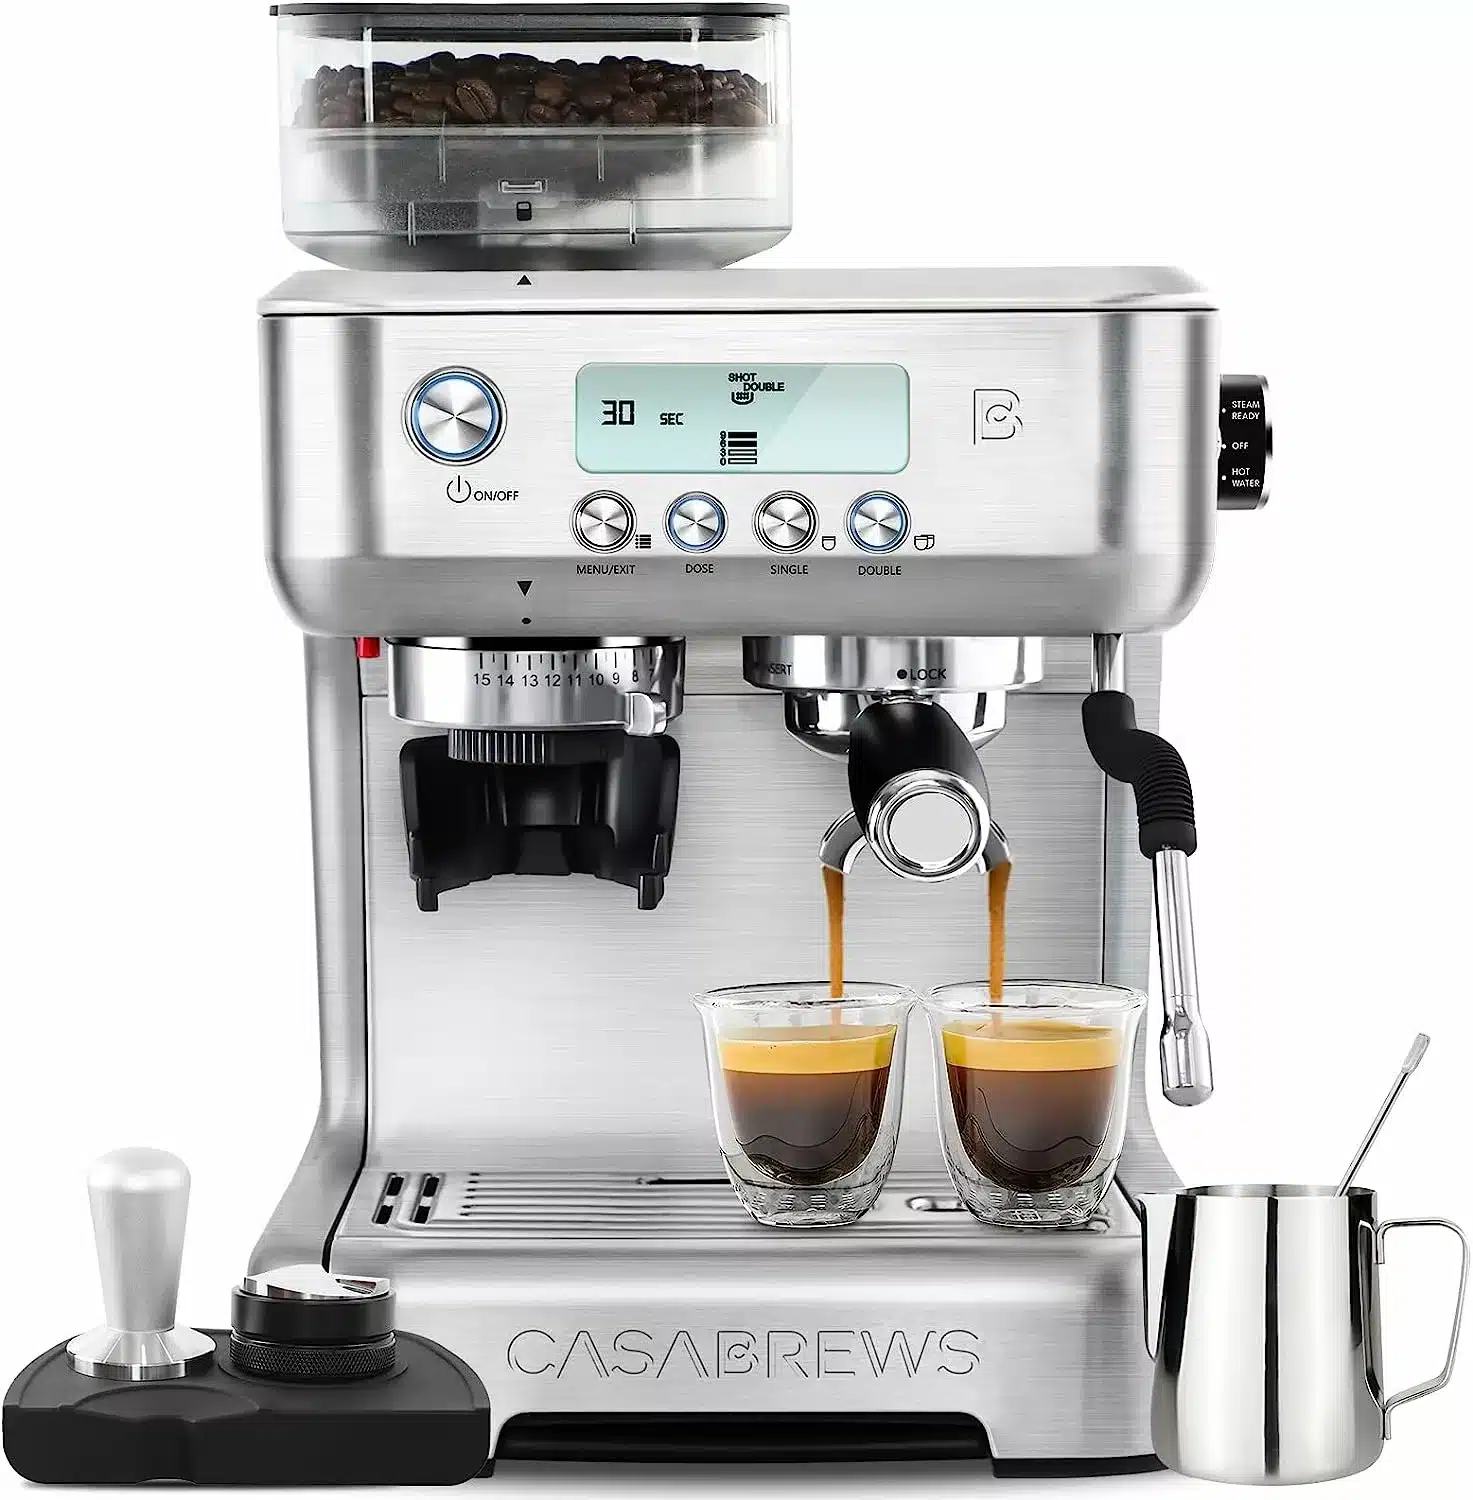 Silver Espresso coffee machine with 2 glasses of black coffee being poured and coffee making utensils in the foreground.